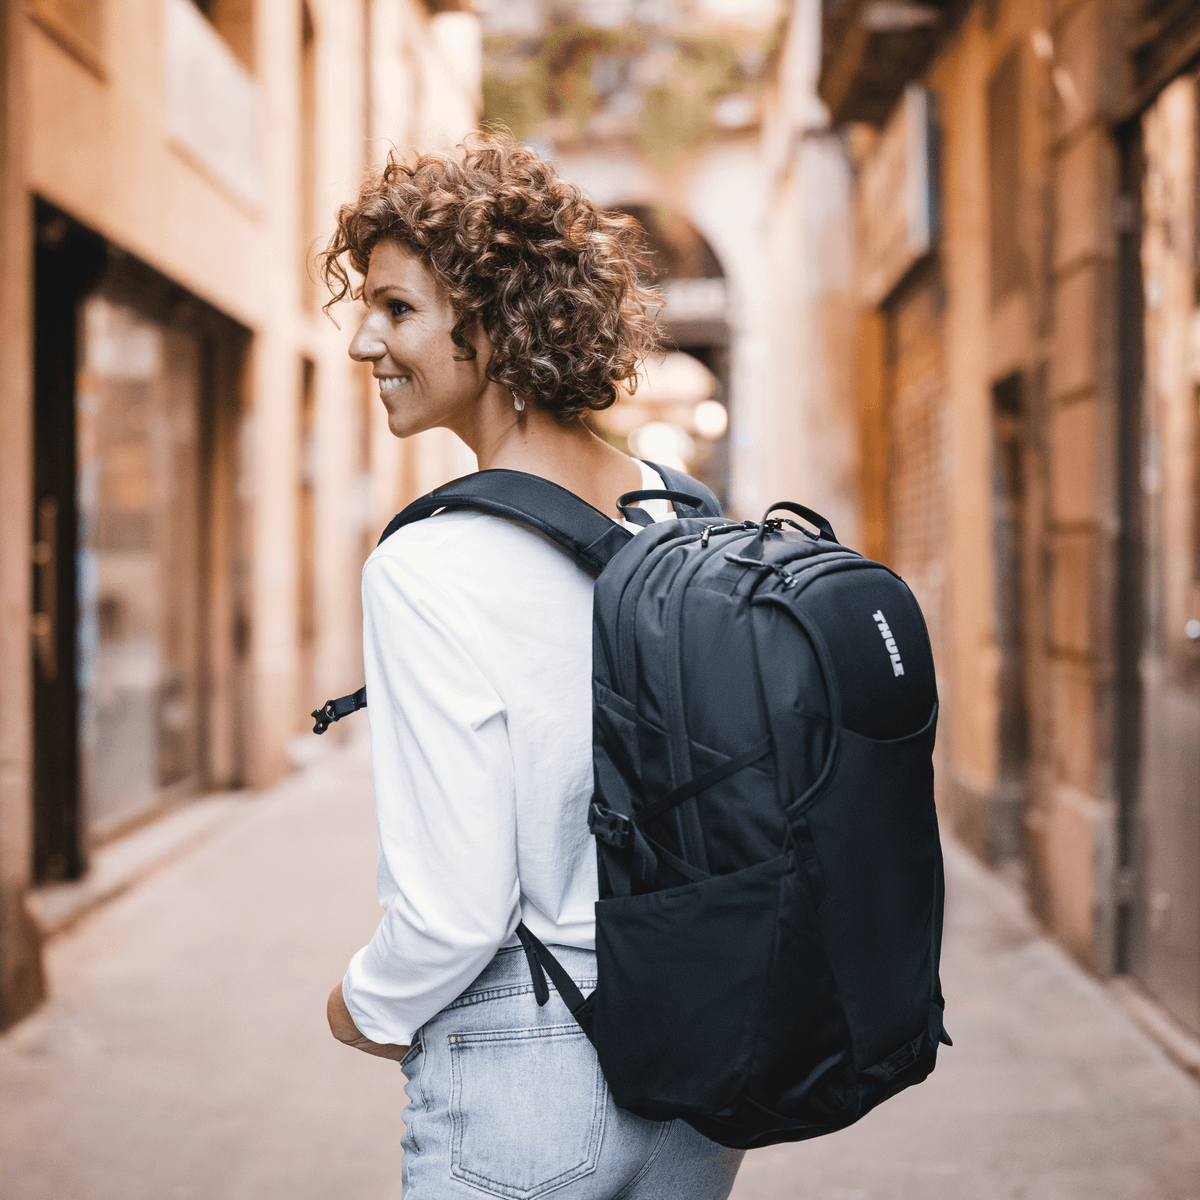 A woman walks down a sunny, narrow street with a black Thule Enroute backpack.